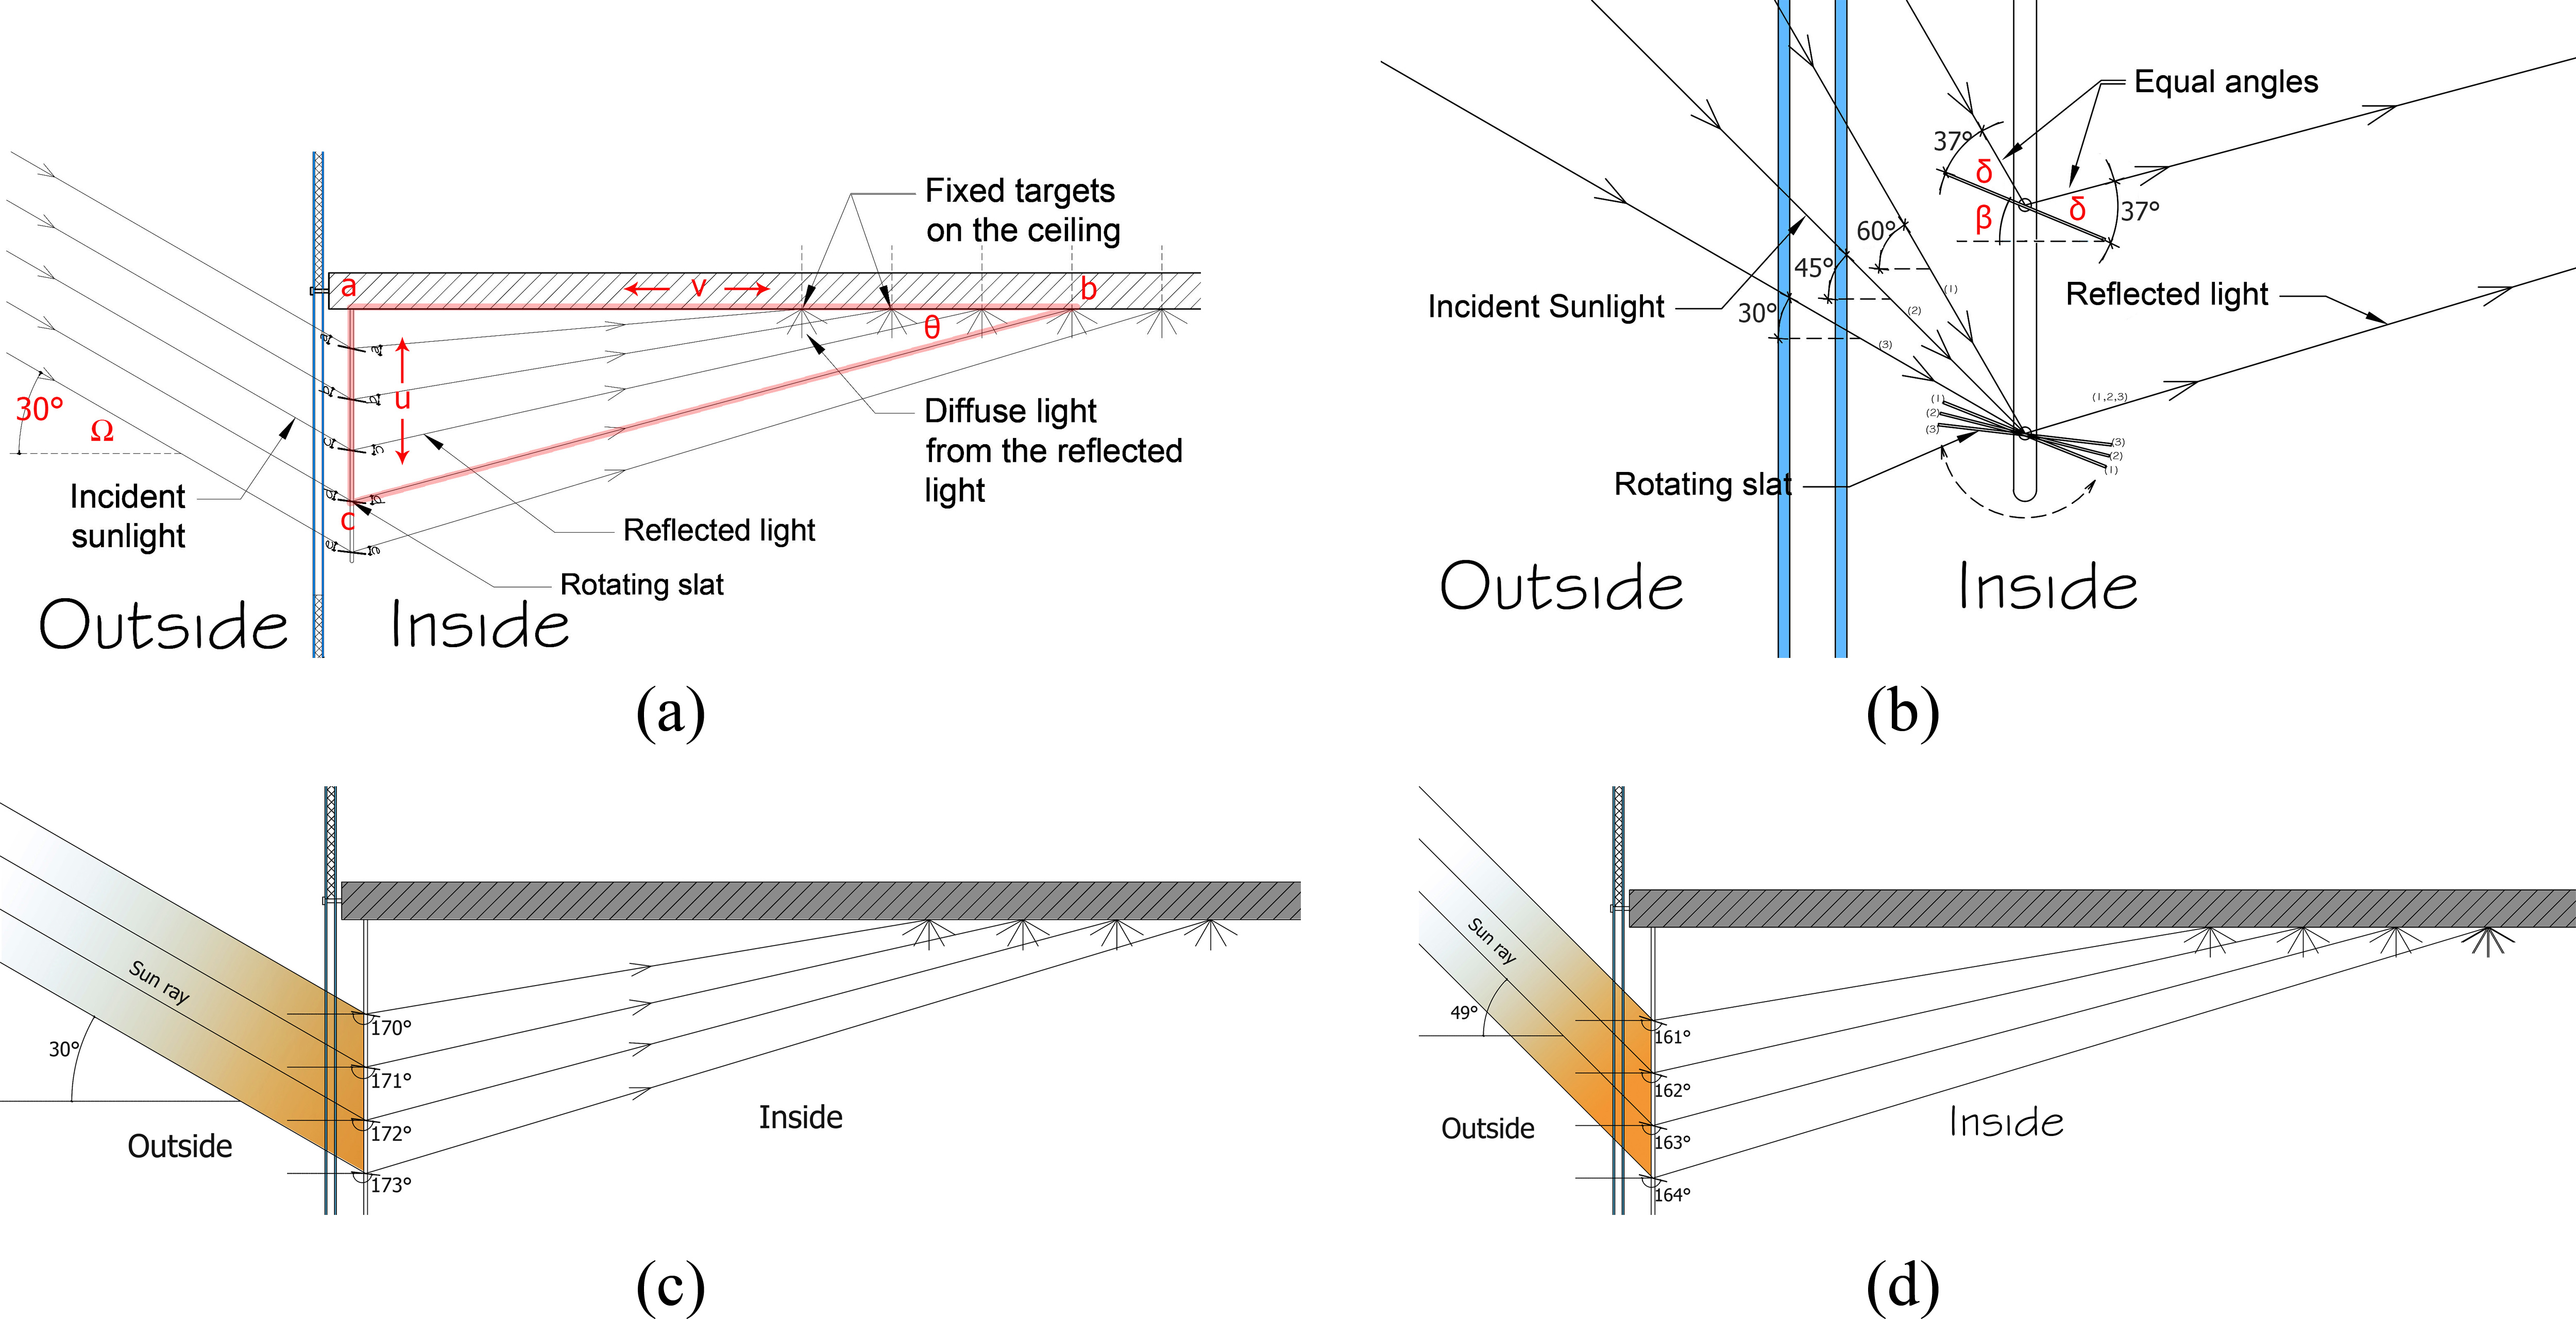 (a) and (b) Cross-sectional view showing the angles of the incident and reflected light. (c) and (d) Illustrating same response with different solar altitudes [26].